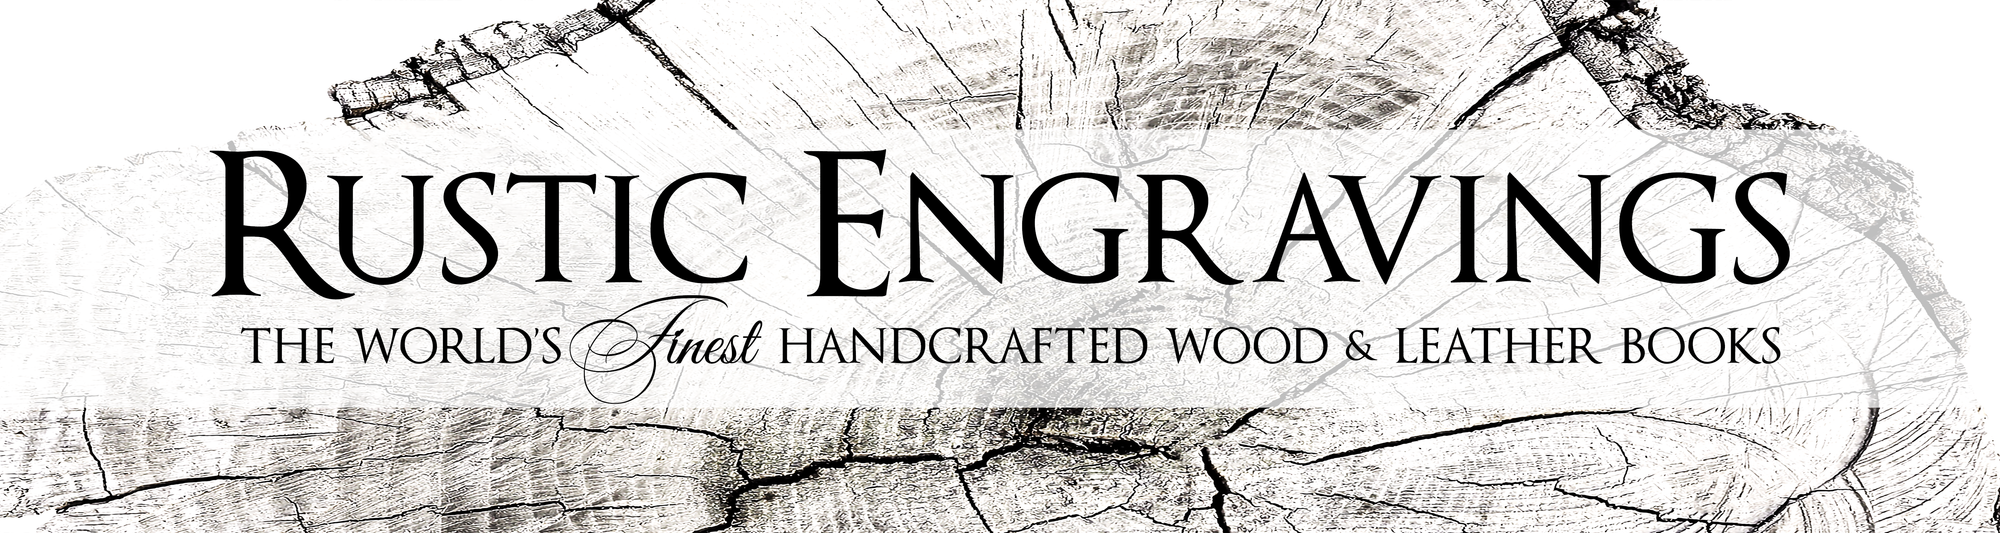 Rustic Engravings Banner | The world's finest handcrafted wood and leather books